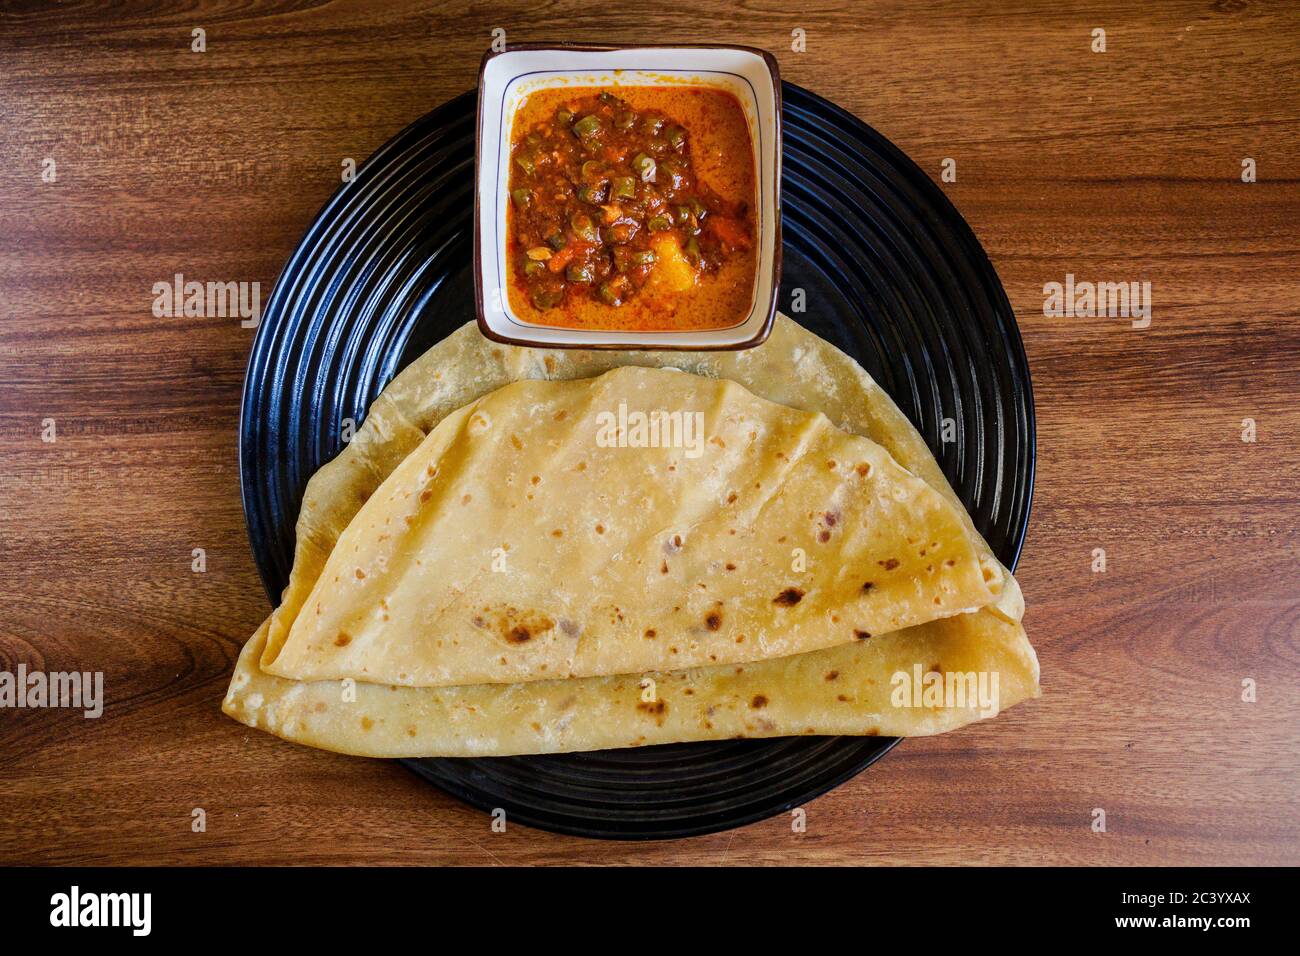 Chapati Pictures | Download Free Images on Unsplash